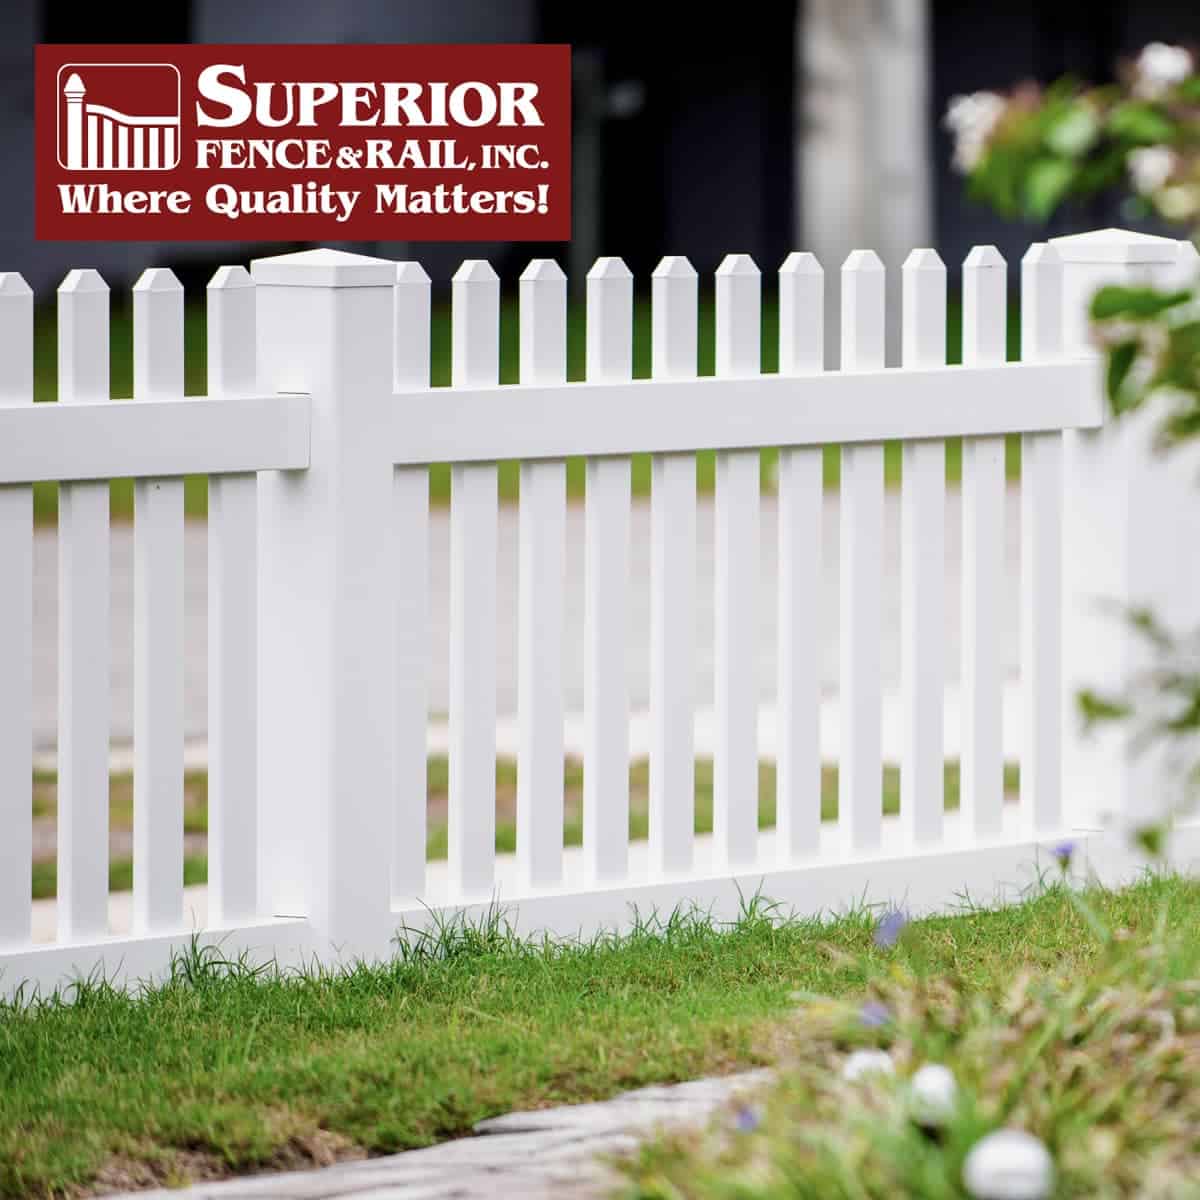 Homewood fence company contractor